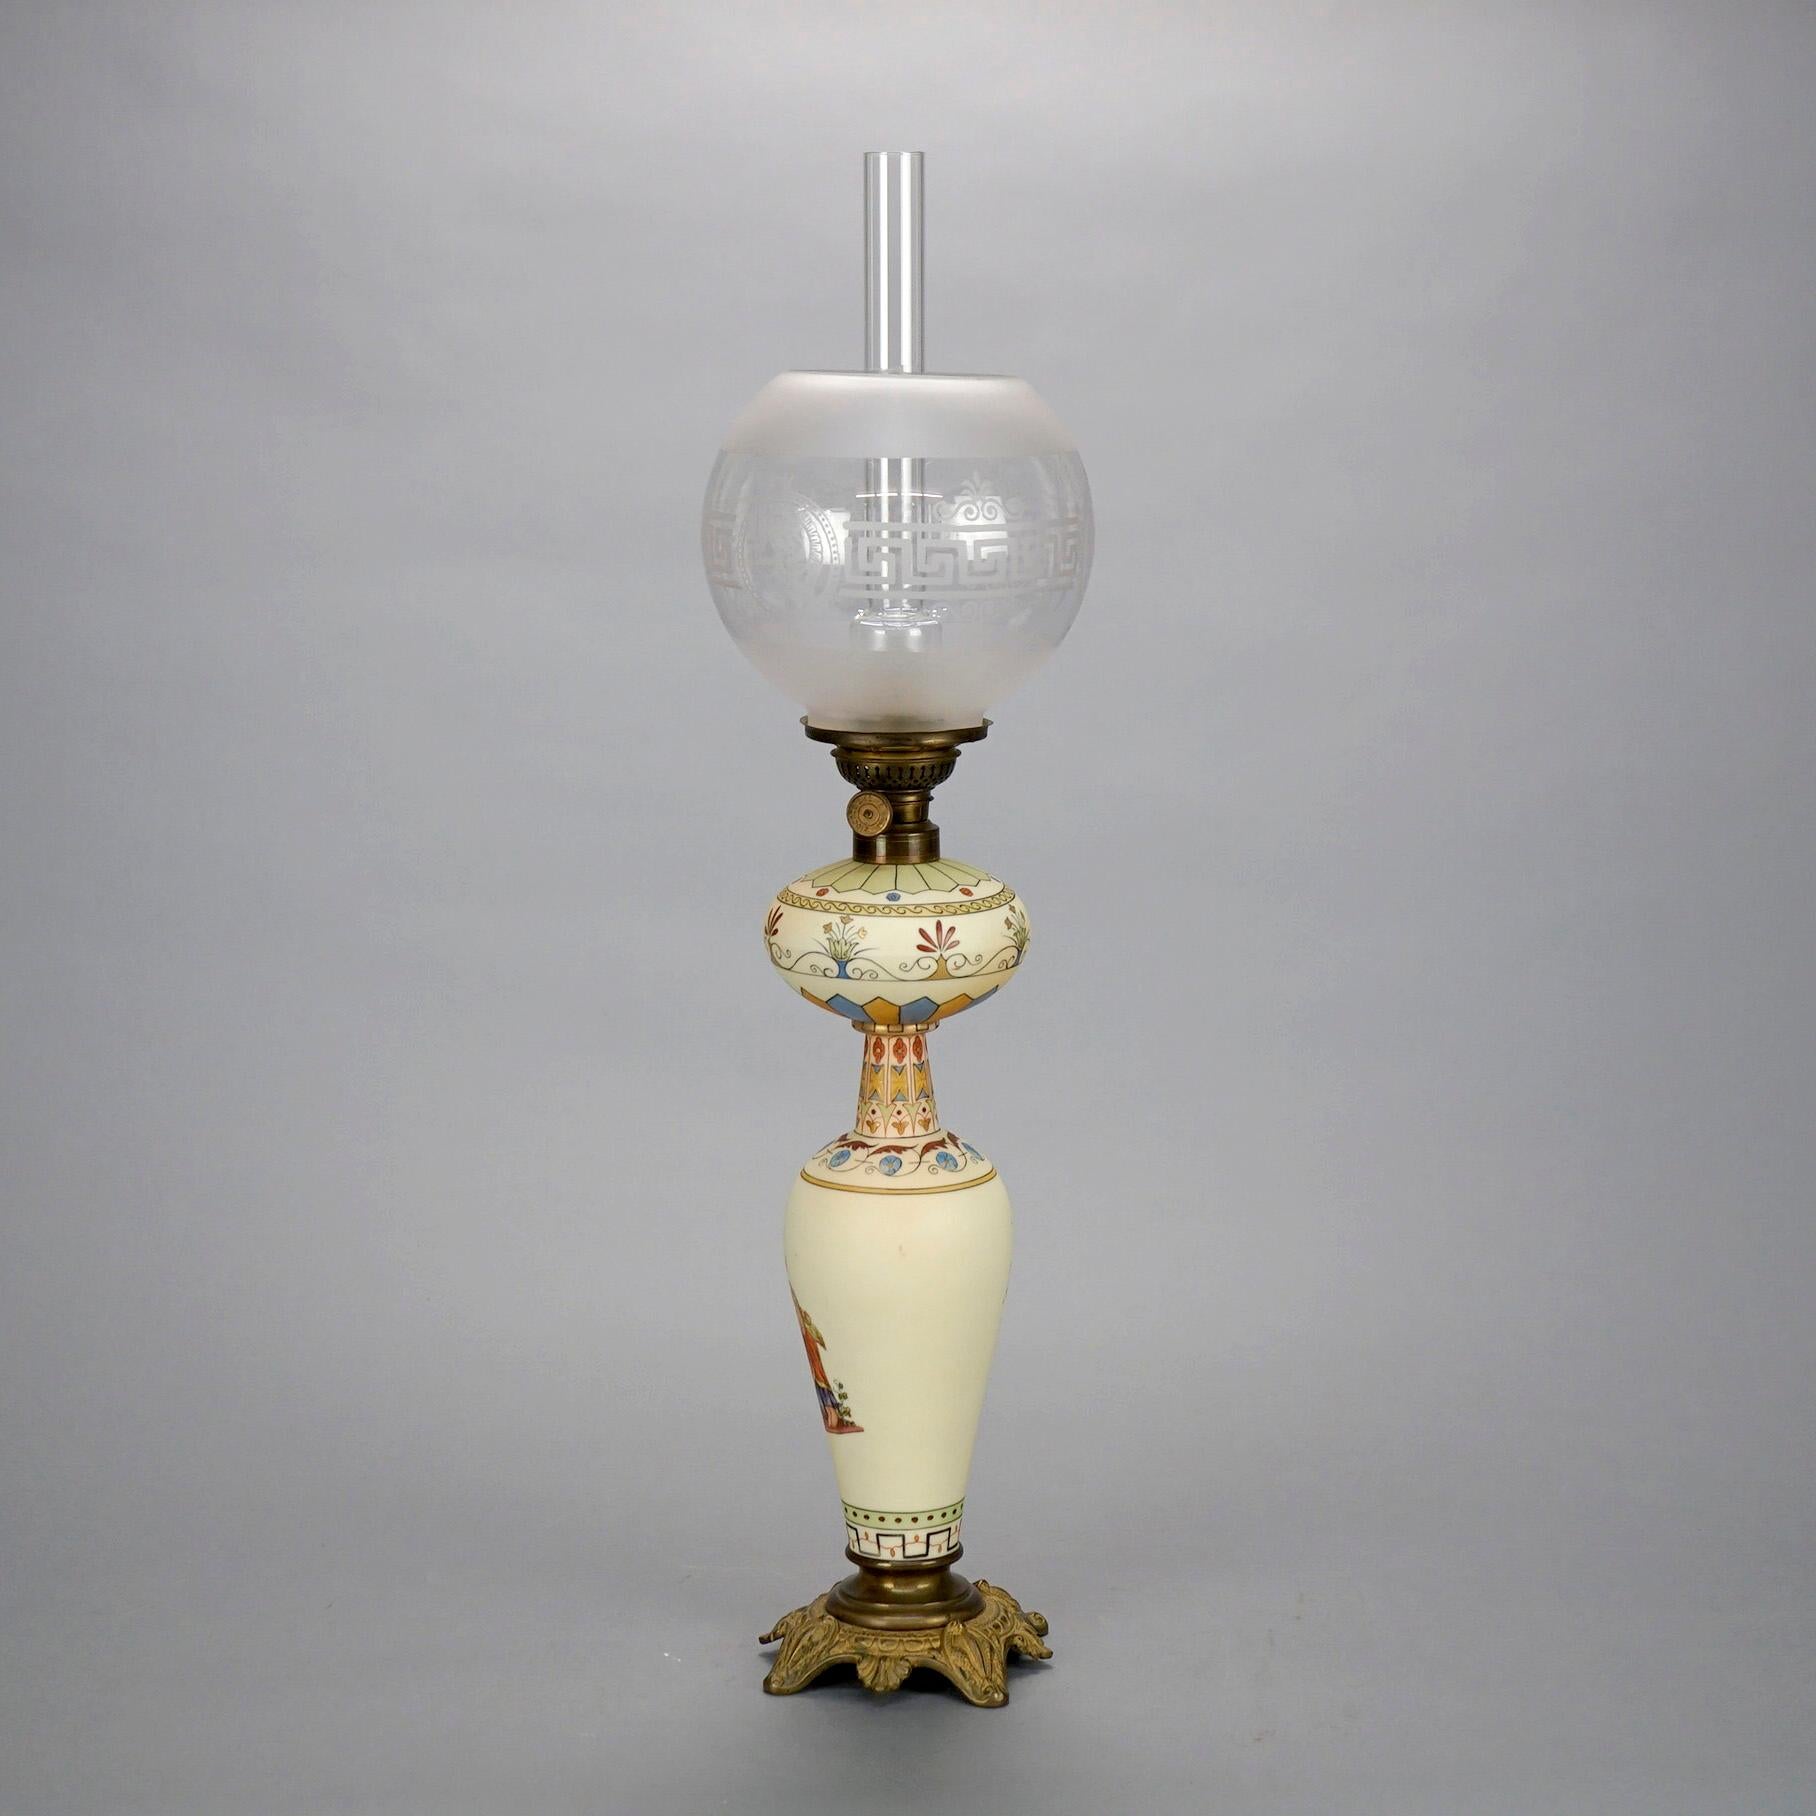 An antique banquet oil lamp offers porcelain base with hand painted genre scene of young girl collection water and en verso lyre, numbered on base as photographed, 19th century

Measures- 24.5'' H x 5.75'' W x 5.75'' D.